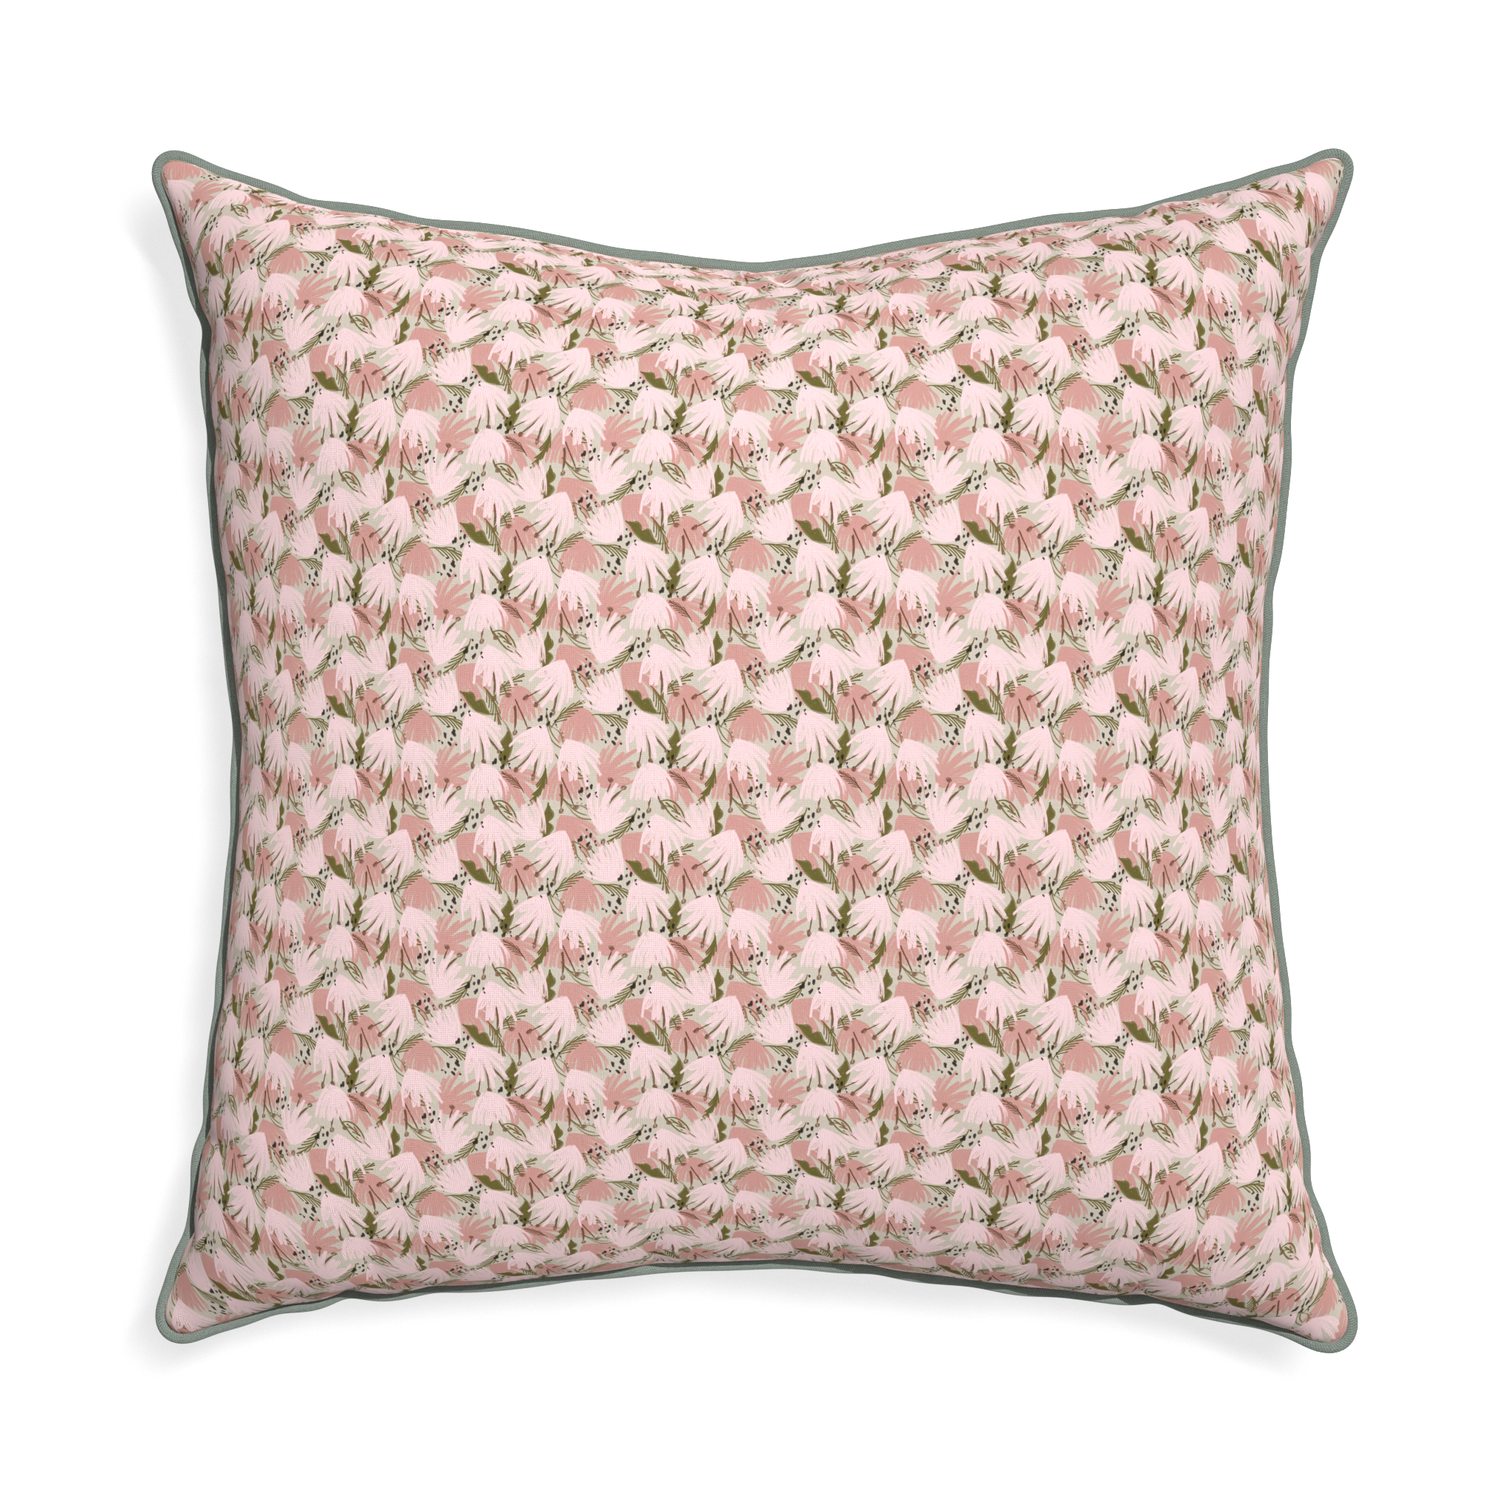 Euro-sham eden pink custom pink floralpillow with sage piping on white background